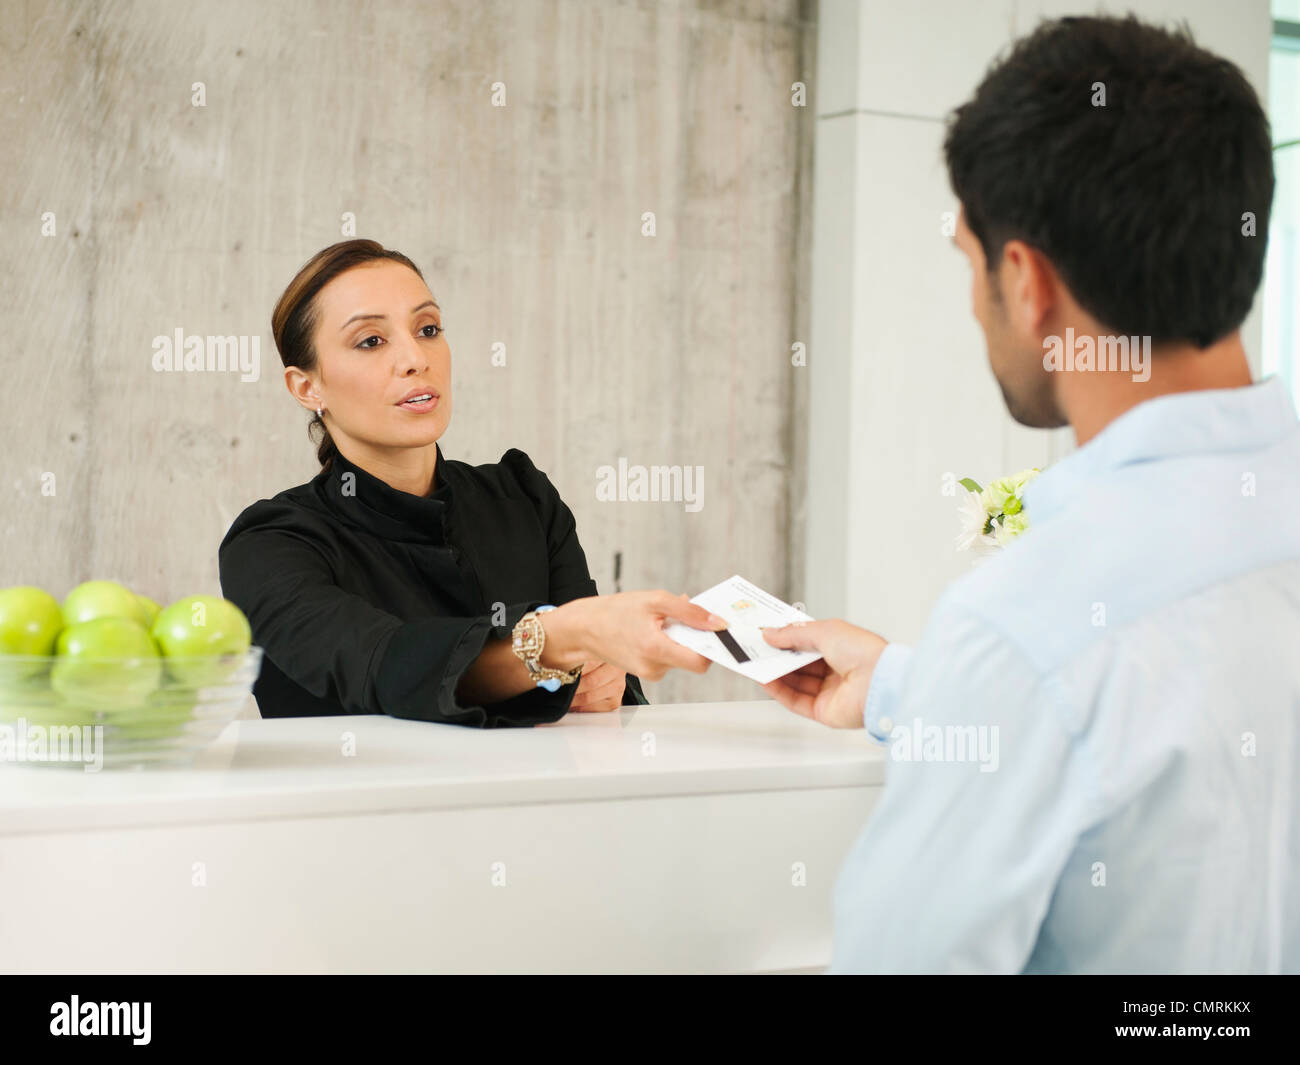 Businessman checking in to hotel Stock Photo